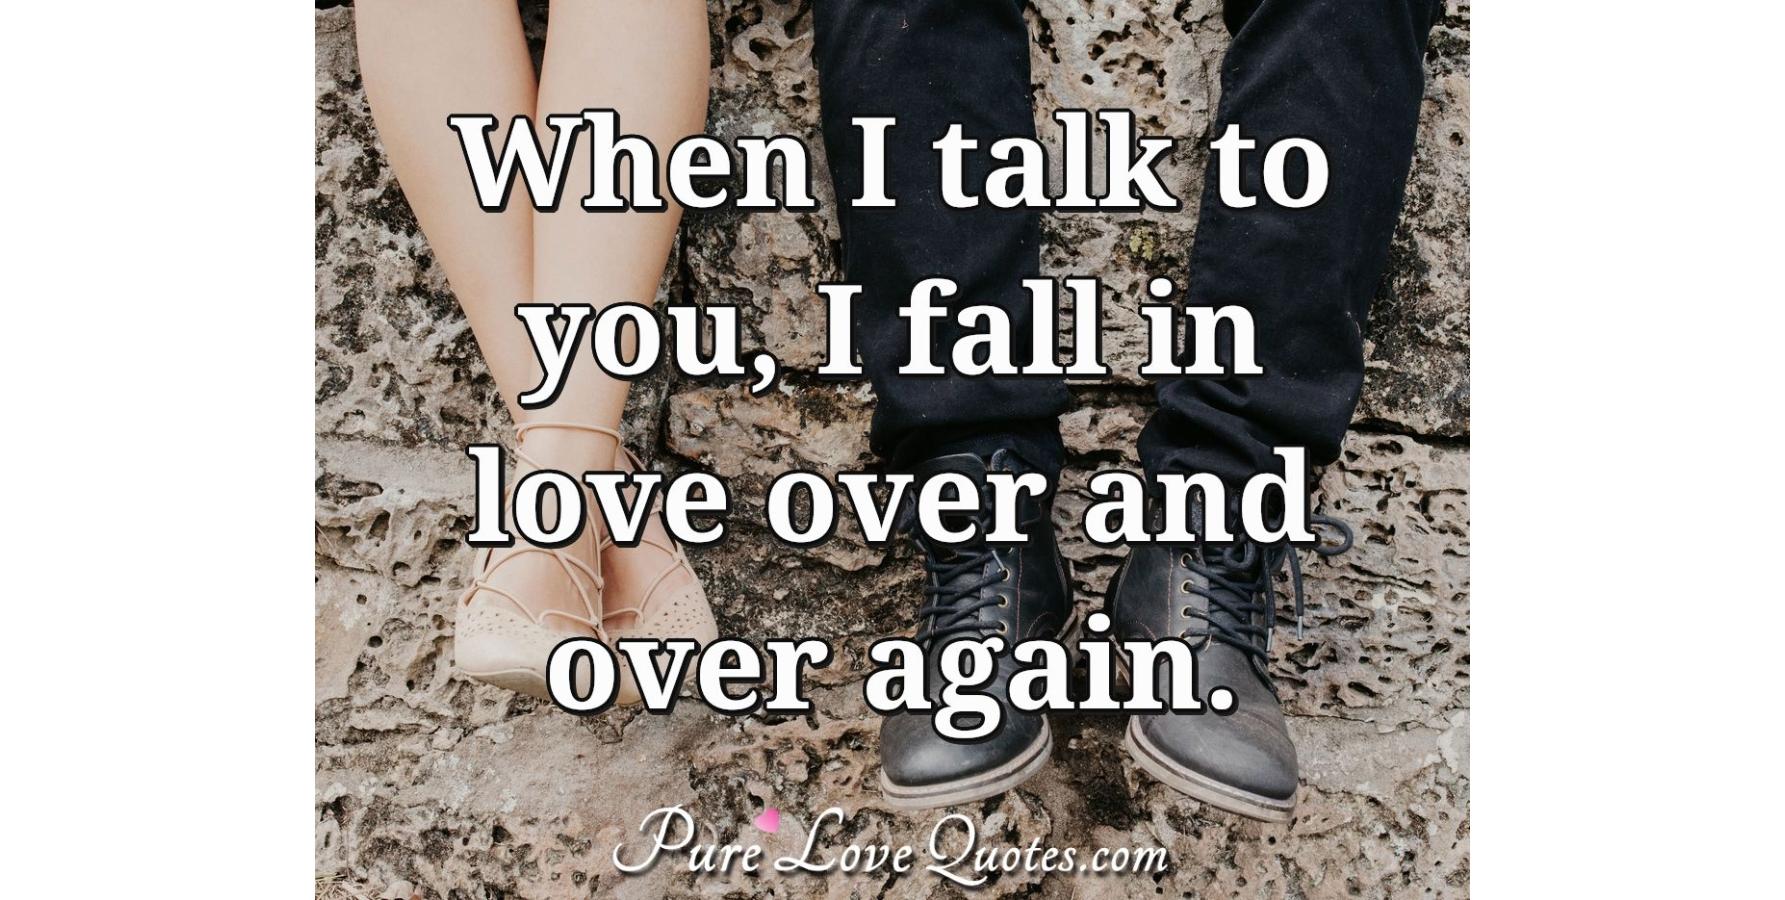 When I talk to you, I fall in love over and over again. | PureLoveQuotes